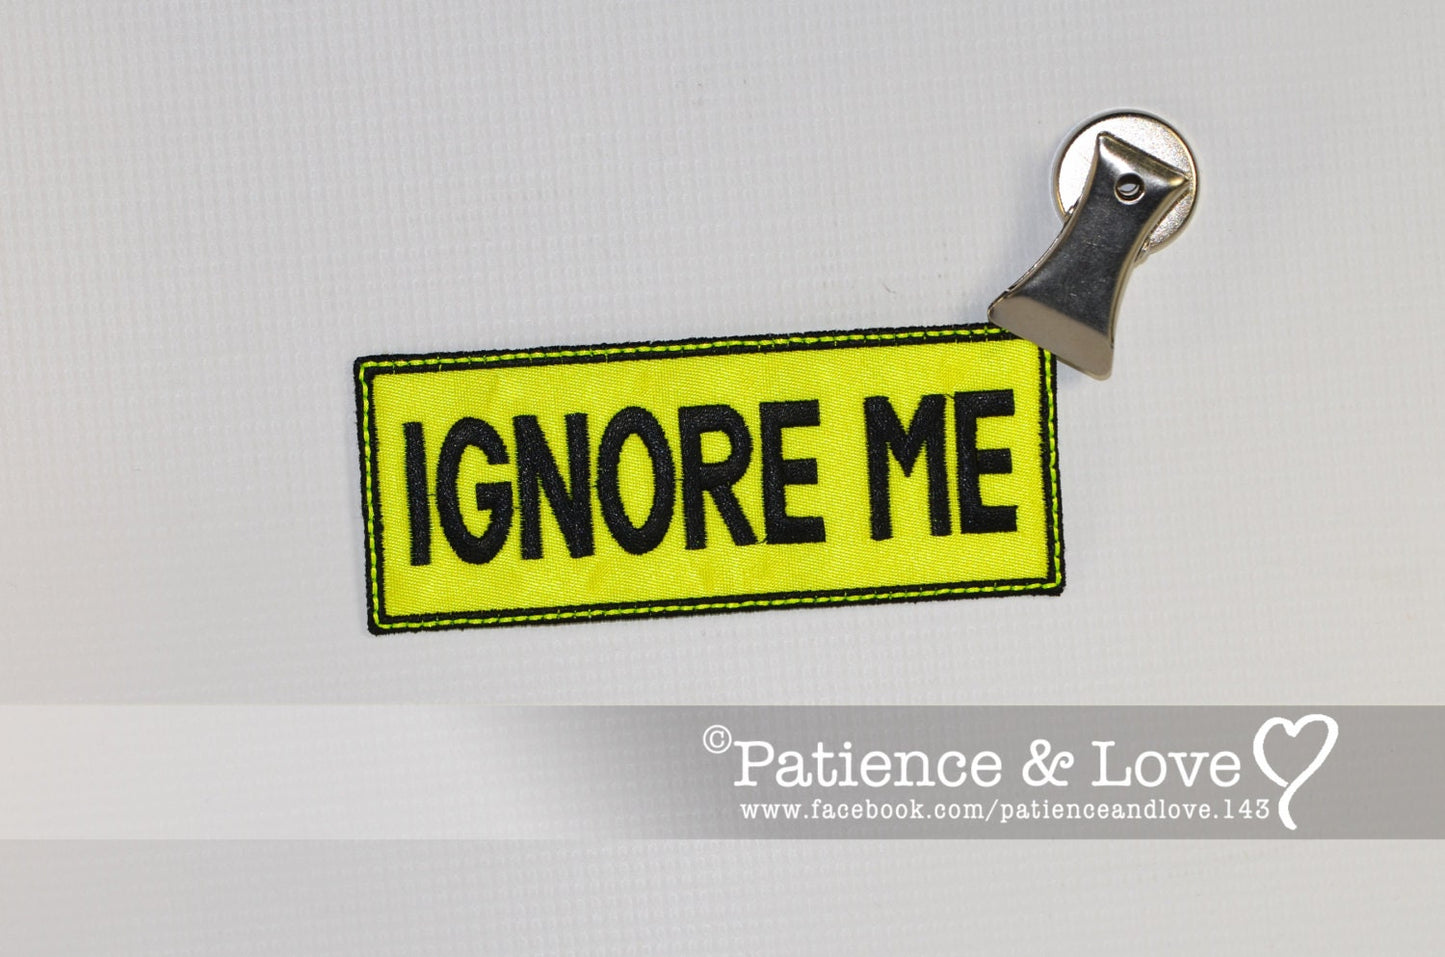 IGNORE ME, 5 X 2 inch rectangular patch